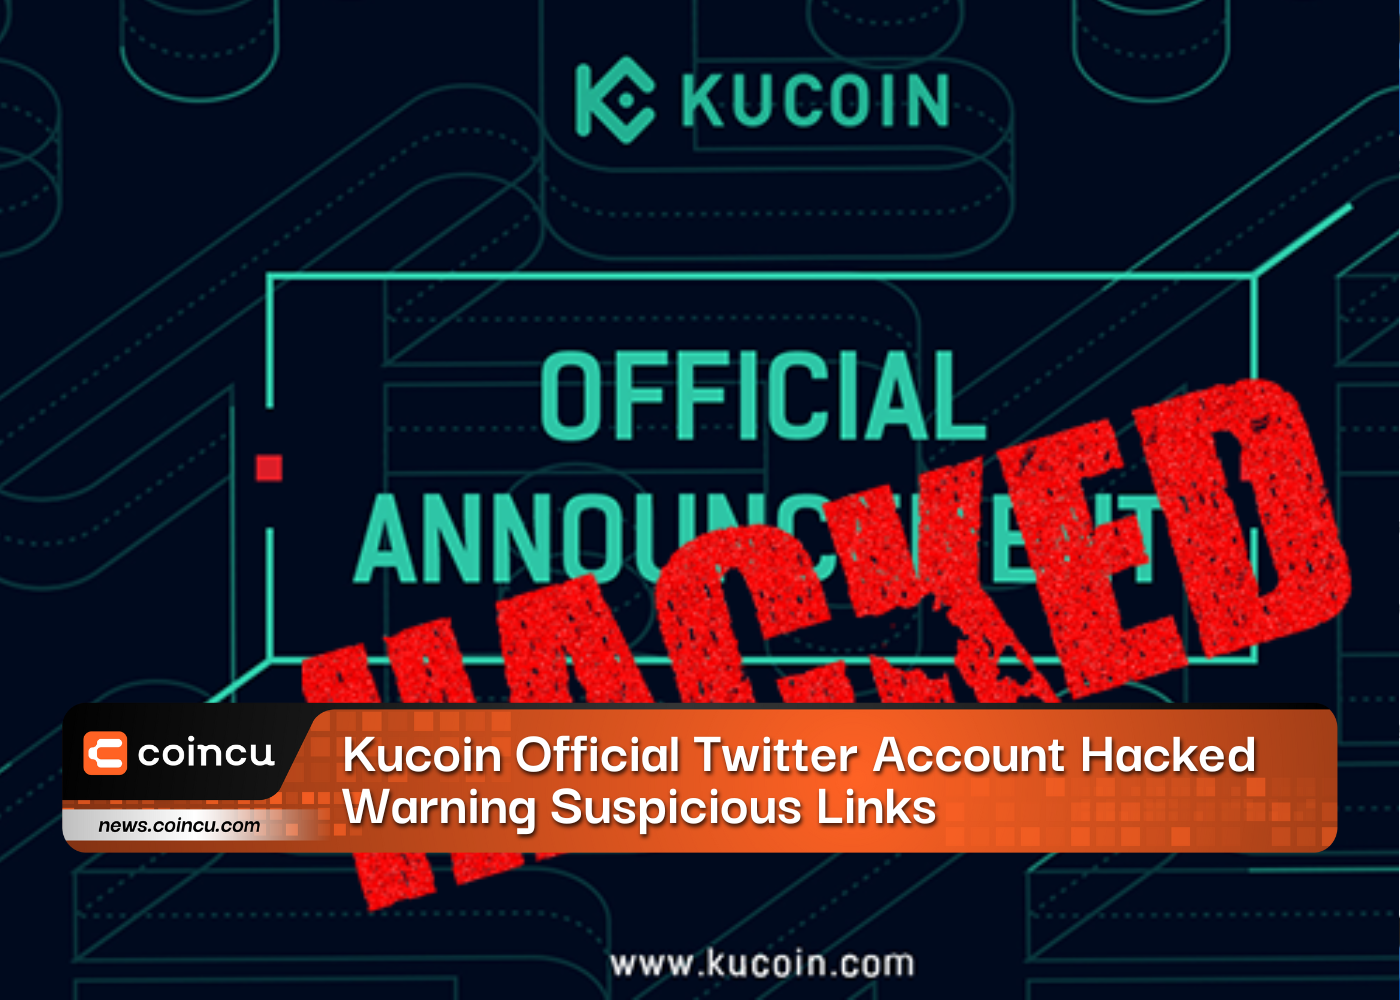 Kucoin Official Twitter Account Hacked, Warning Suspicious Links